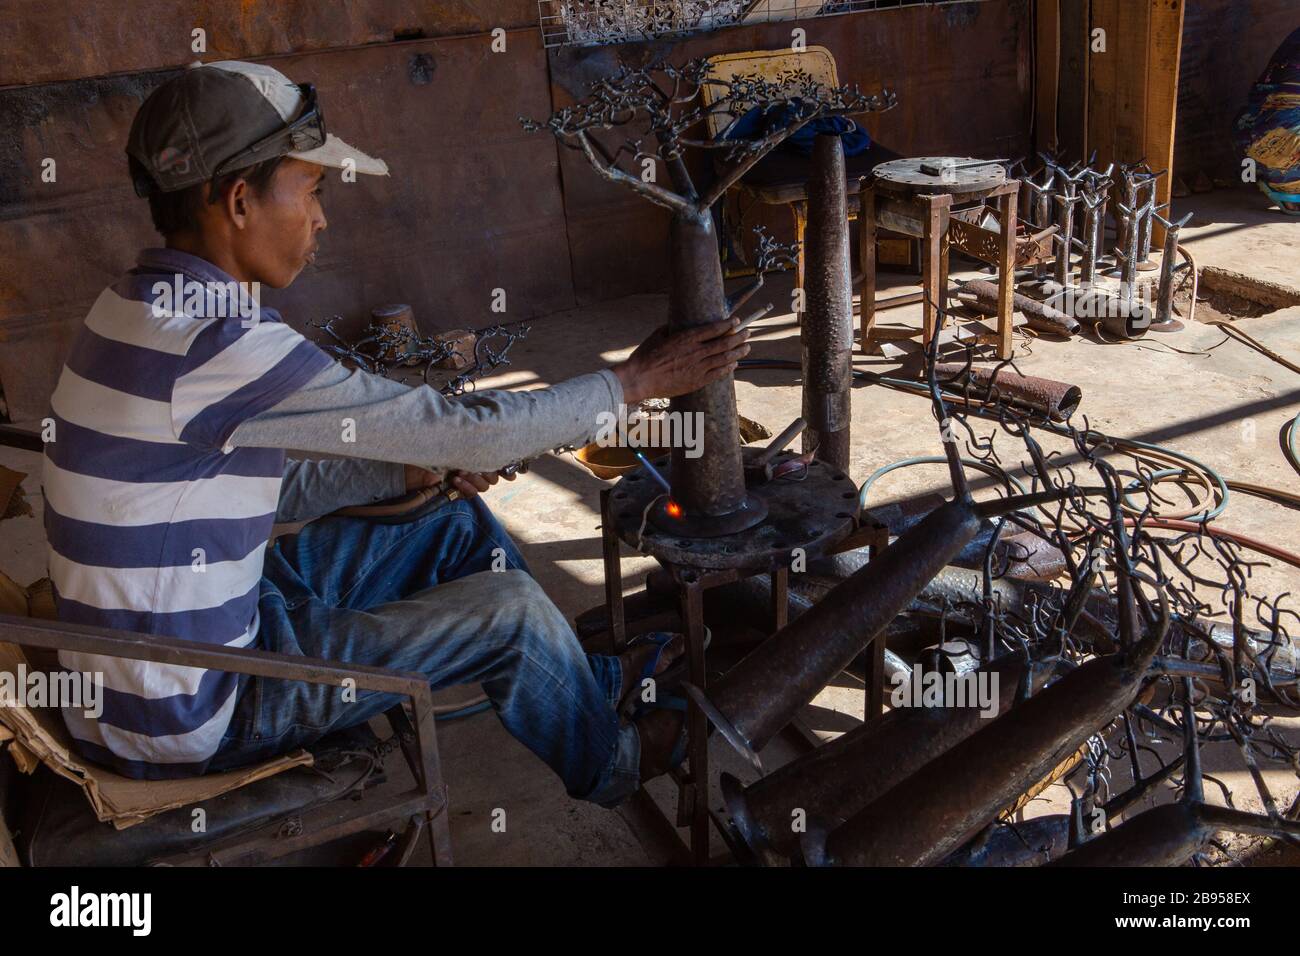 Welder in the social and solidarity enterprise of metalworking with recycled material created by Violette and Dieudonne in Antananarivo Stock Photo